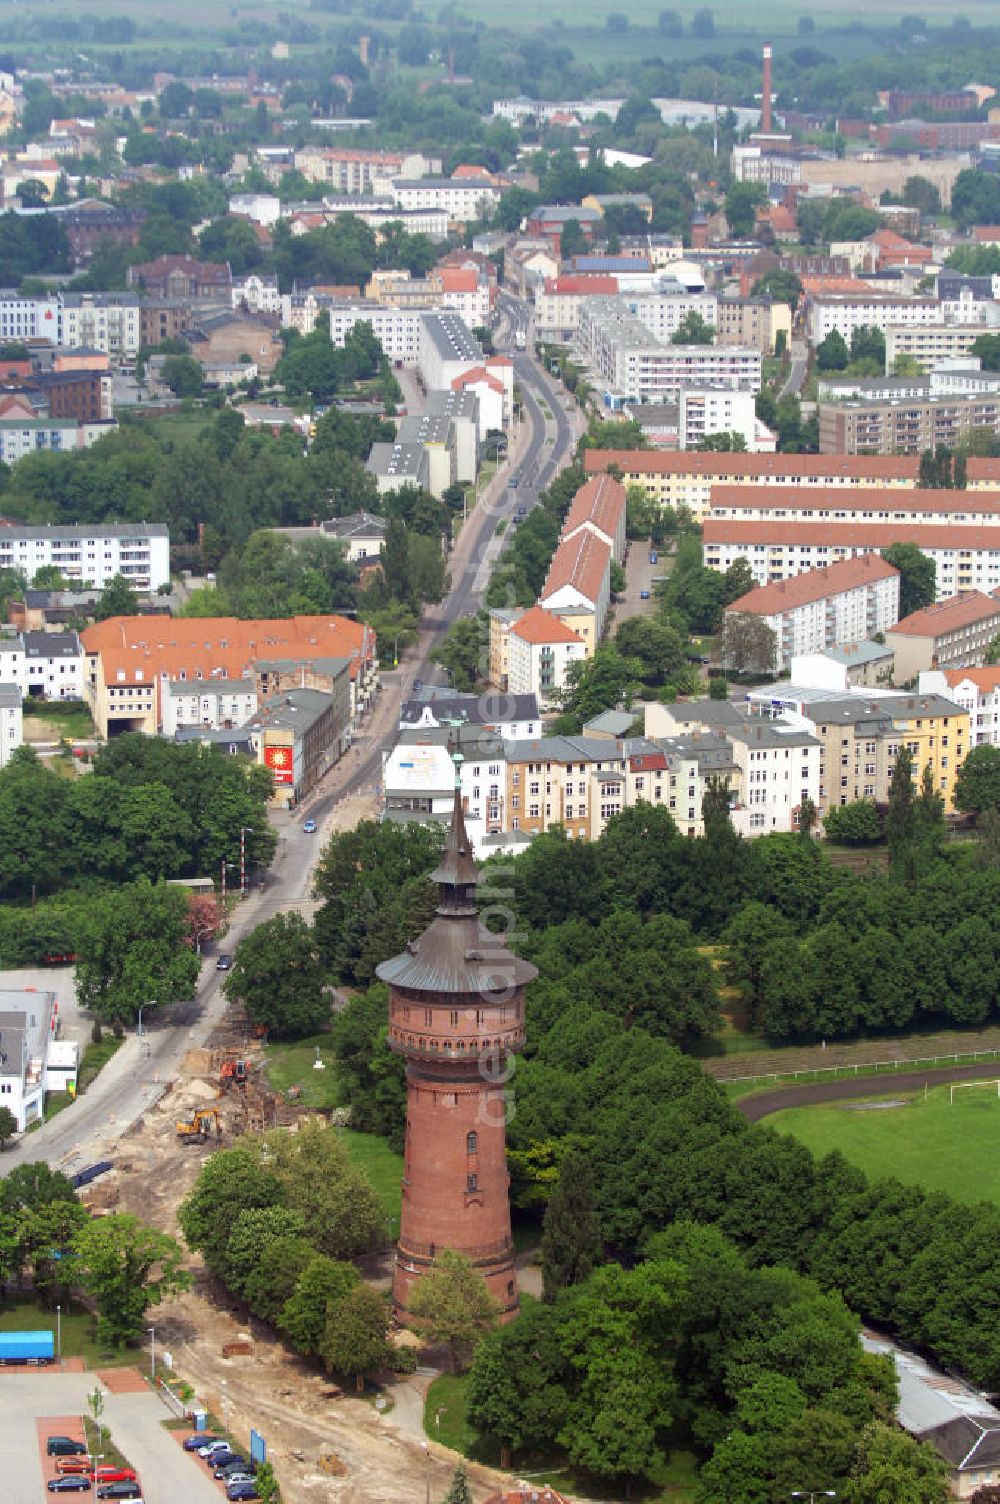 Forst / Lausitz from above - Built from the 1901-1903 and popularly called our Thicker water tower on the street Spremberger Strasse in Forst in the Lusatia